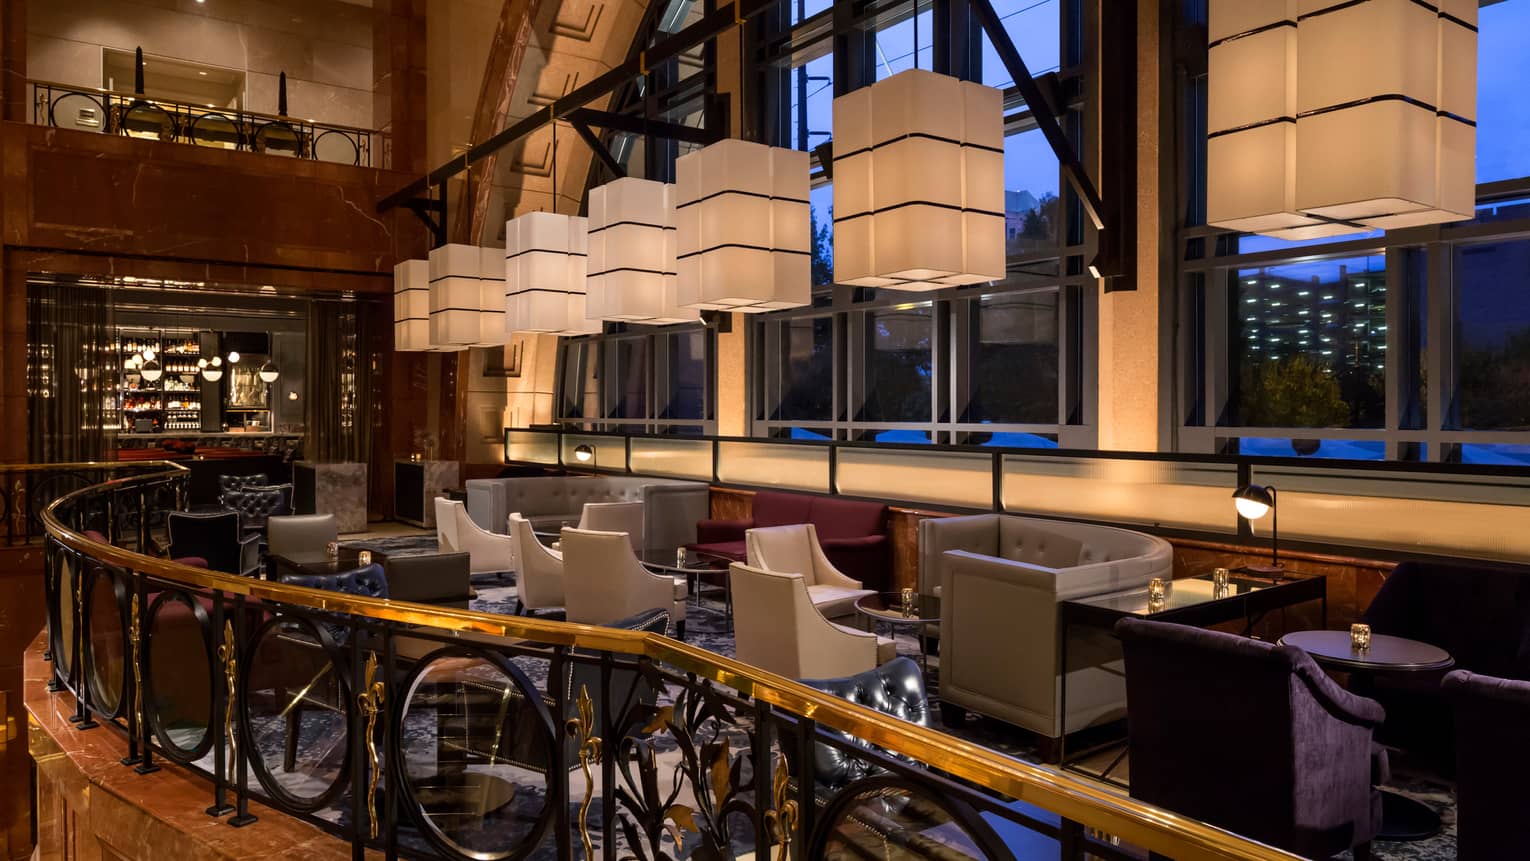 White rectangular lanterns hang above Bar Margot lounge area in front of arched window